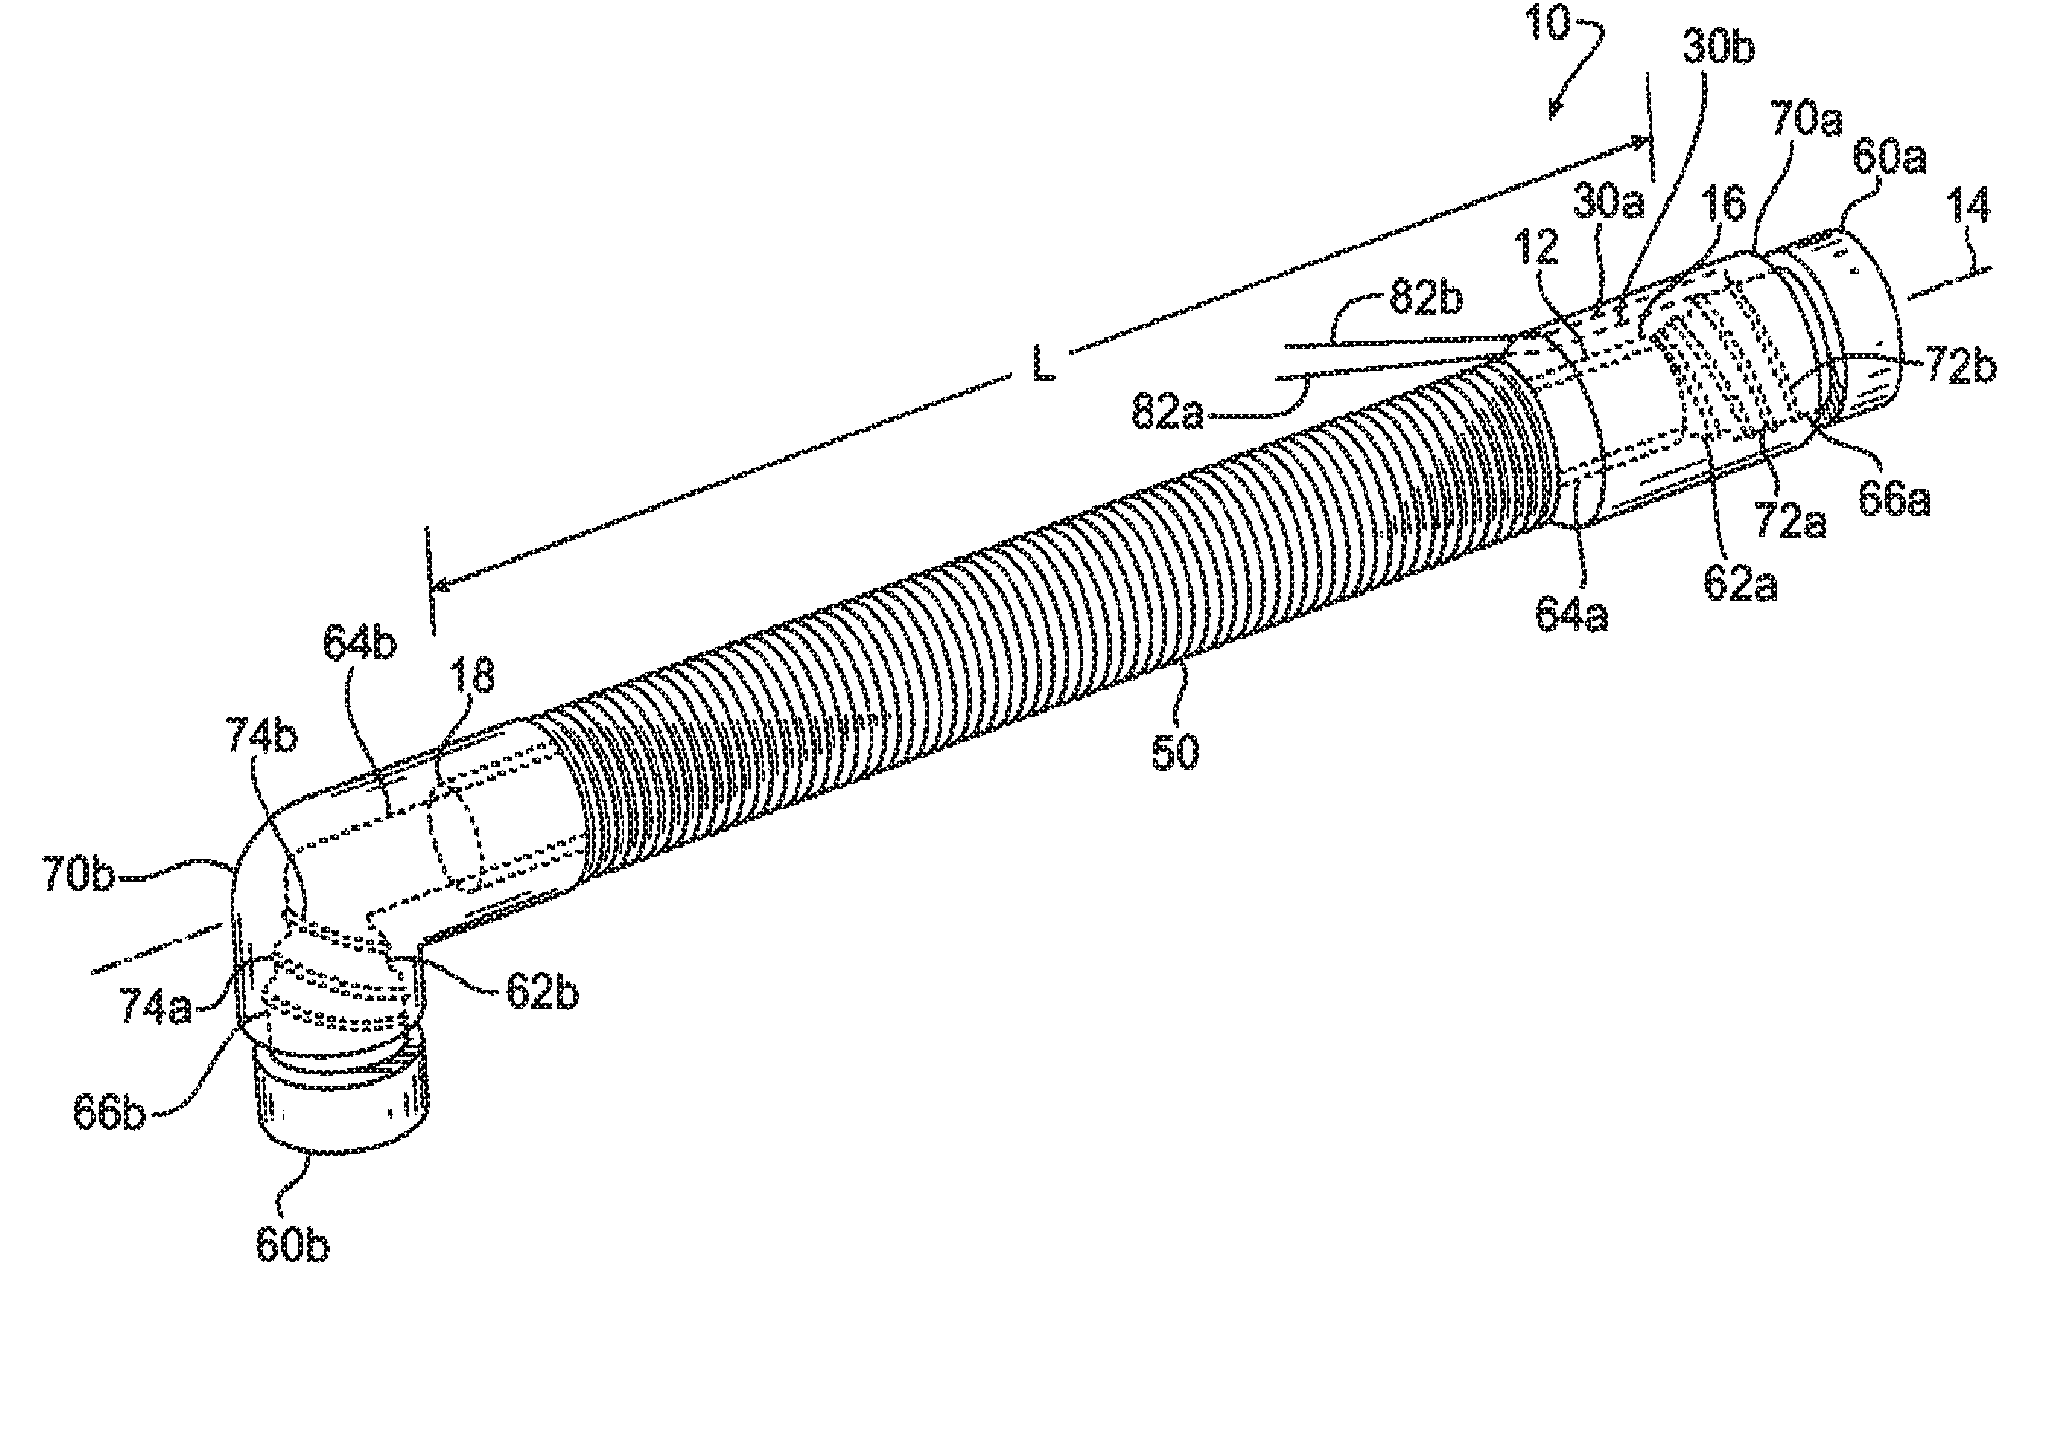 Method of making an electrically-heated hose assembly